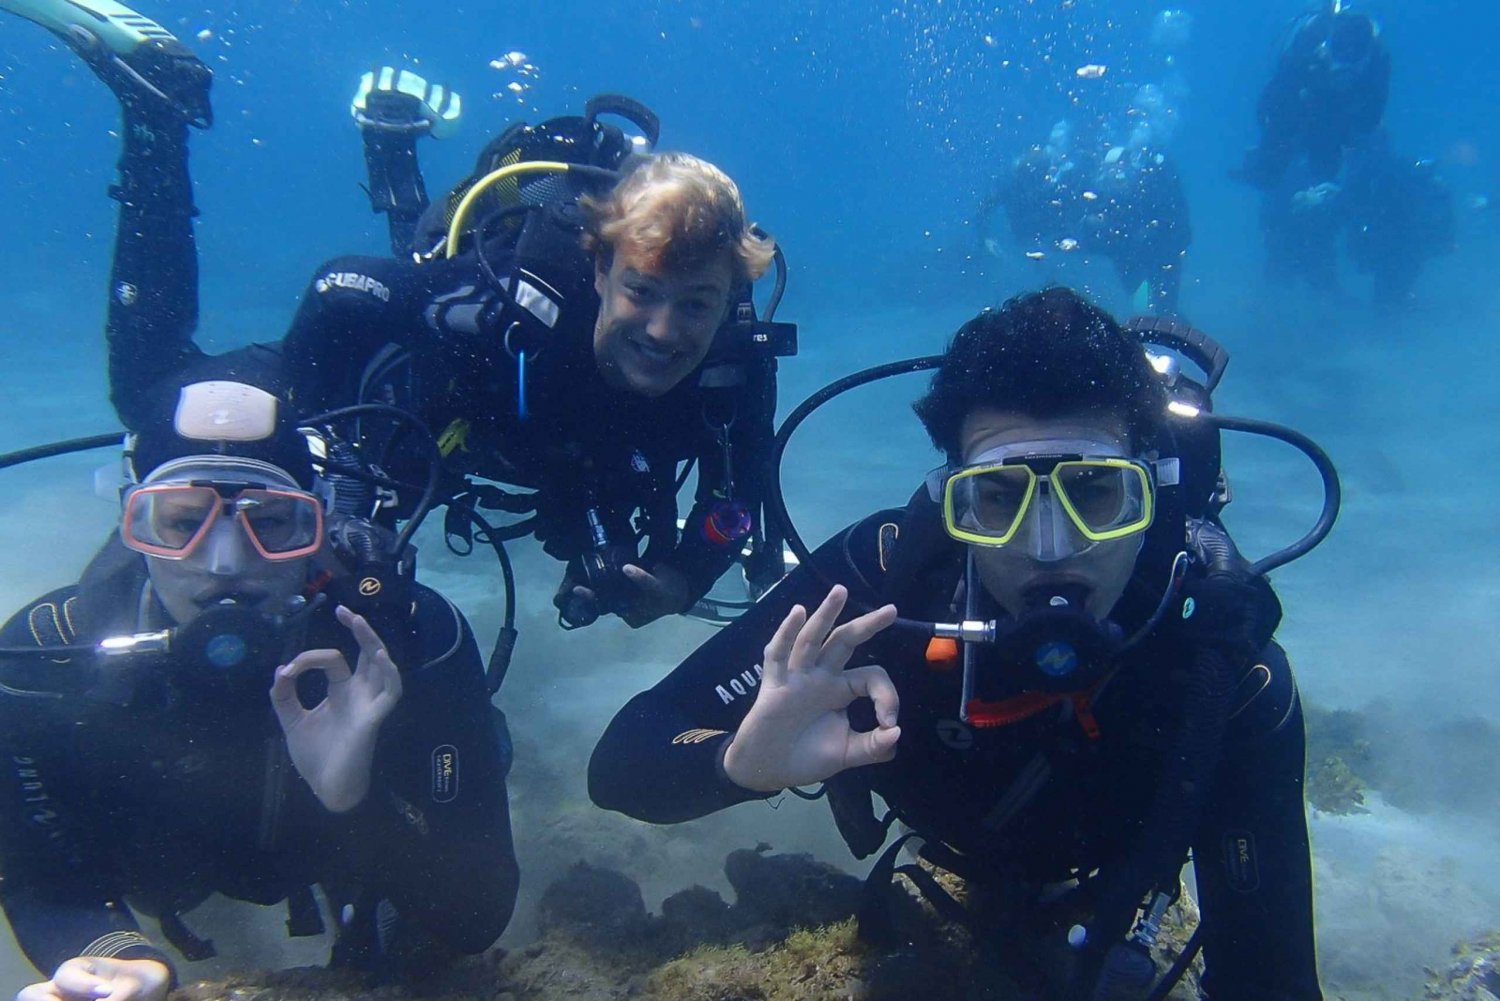 Half-Day Scuba Diving in Tenerife from Abades Beach